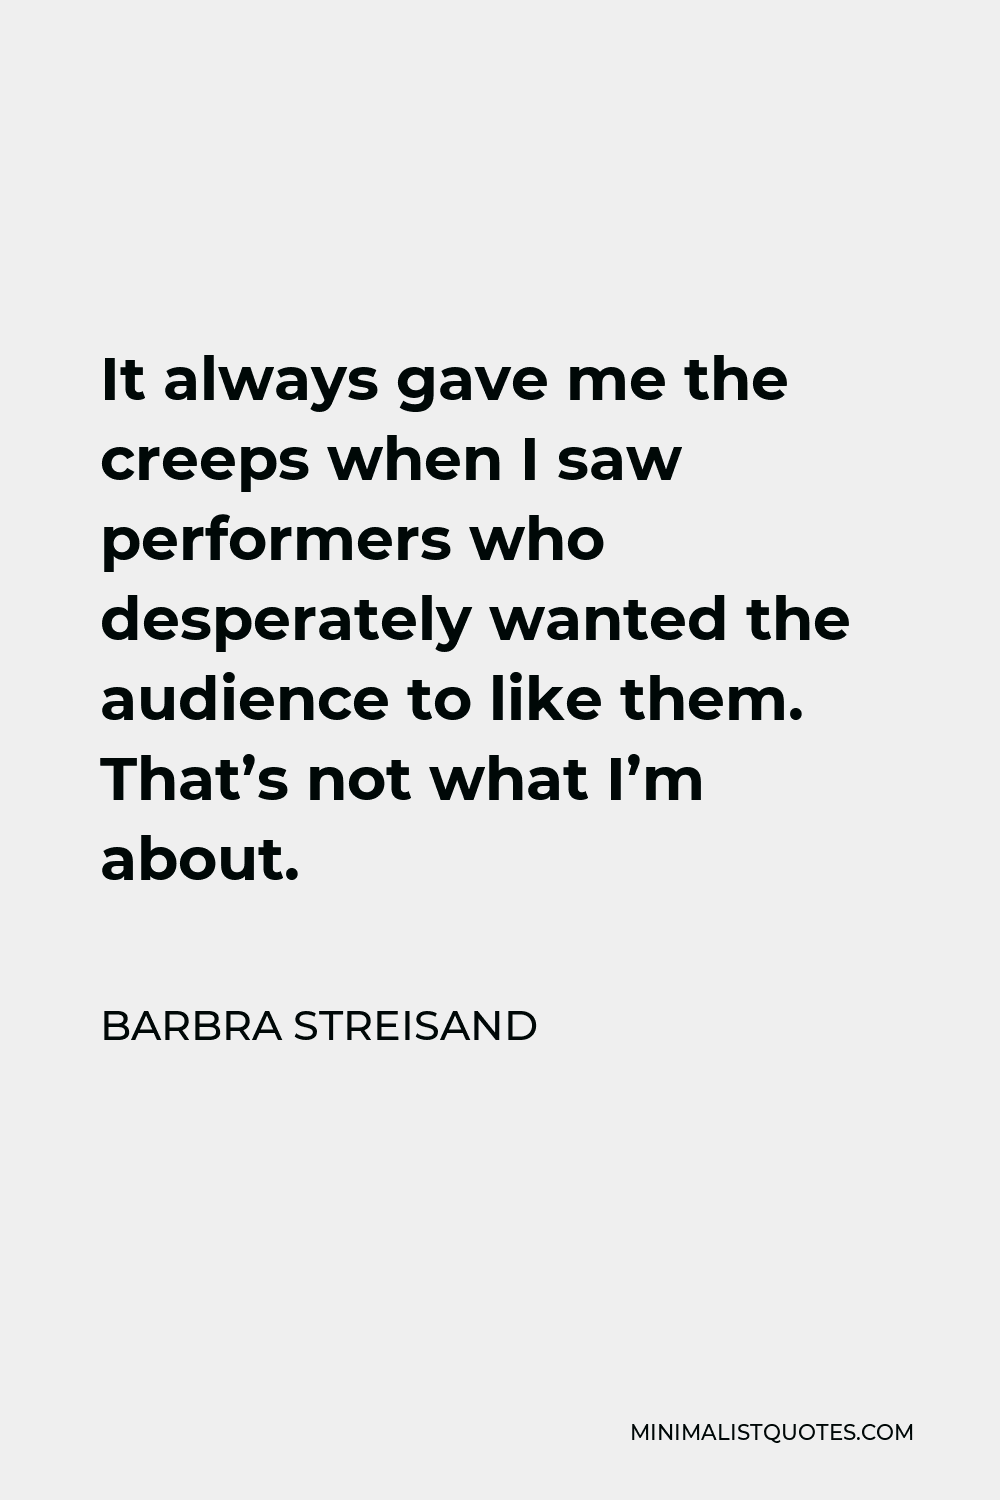 Barbra Streisand Quote - It always gave me the creeps when I saw performers who desperately wanted the audience to like them. That’s not what I’m about.